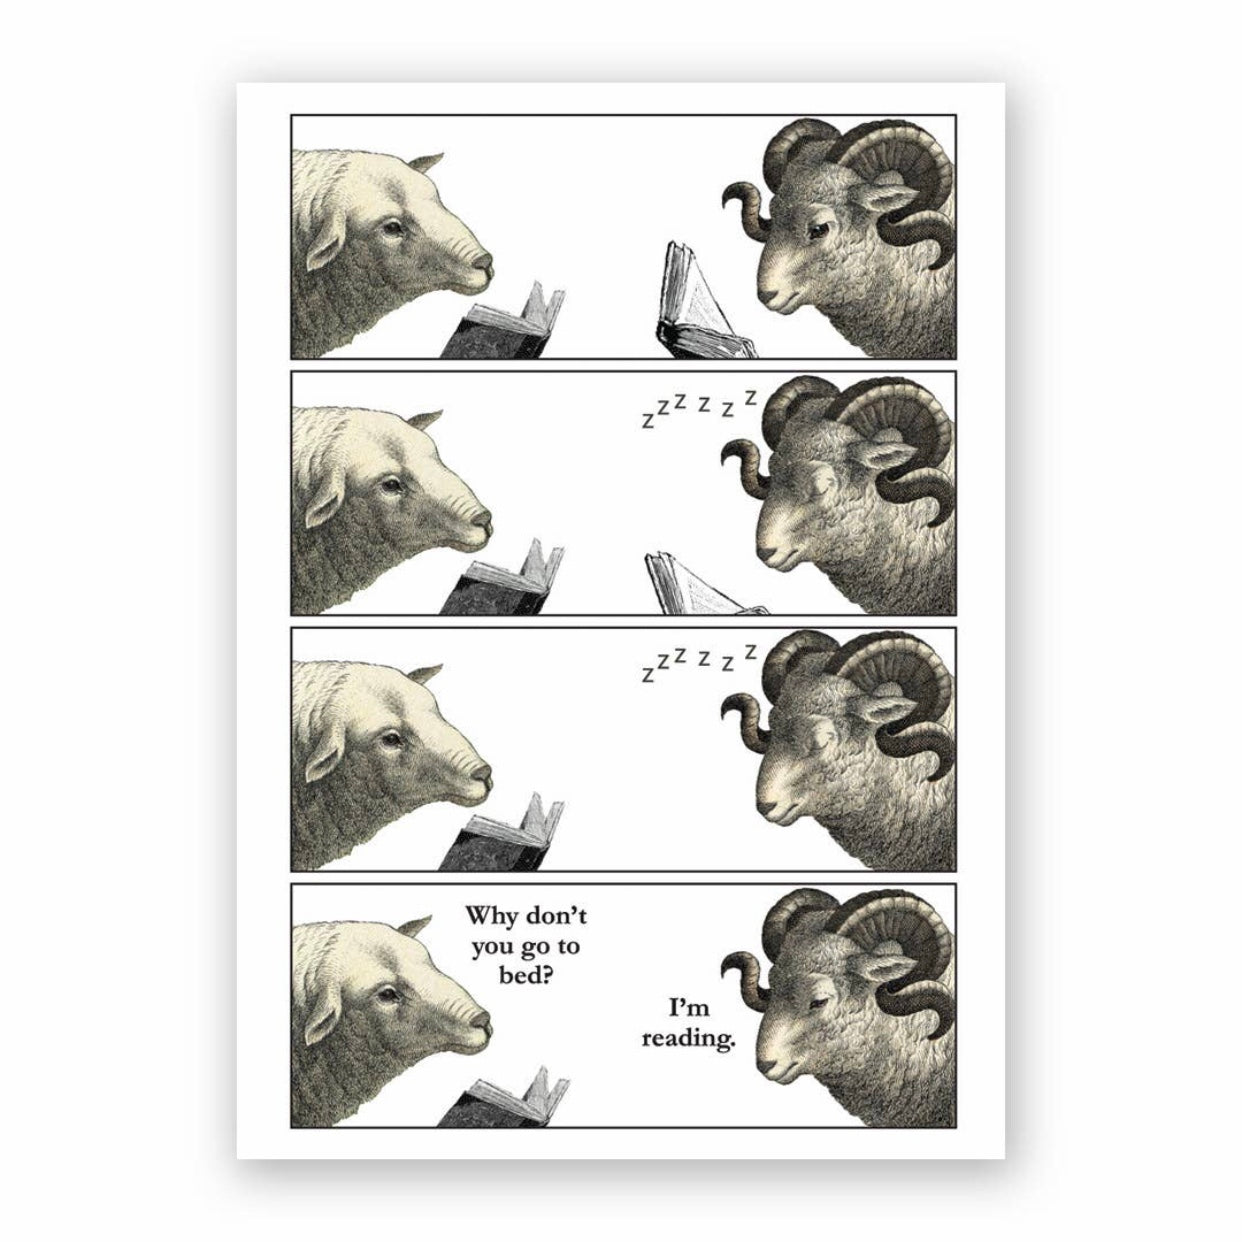 Funny greeting card